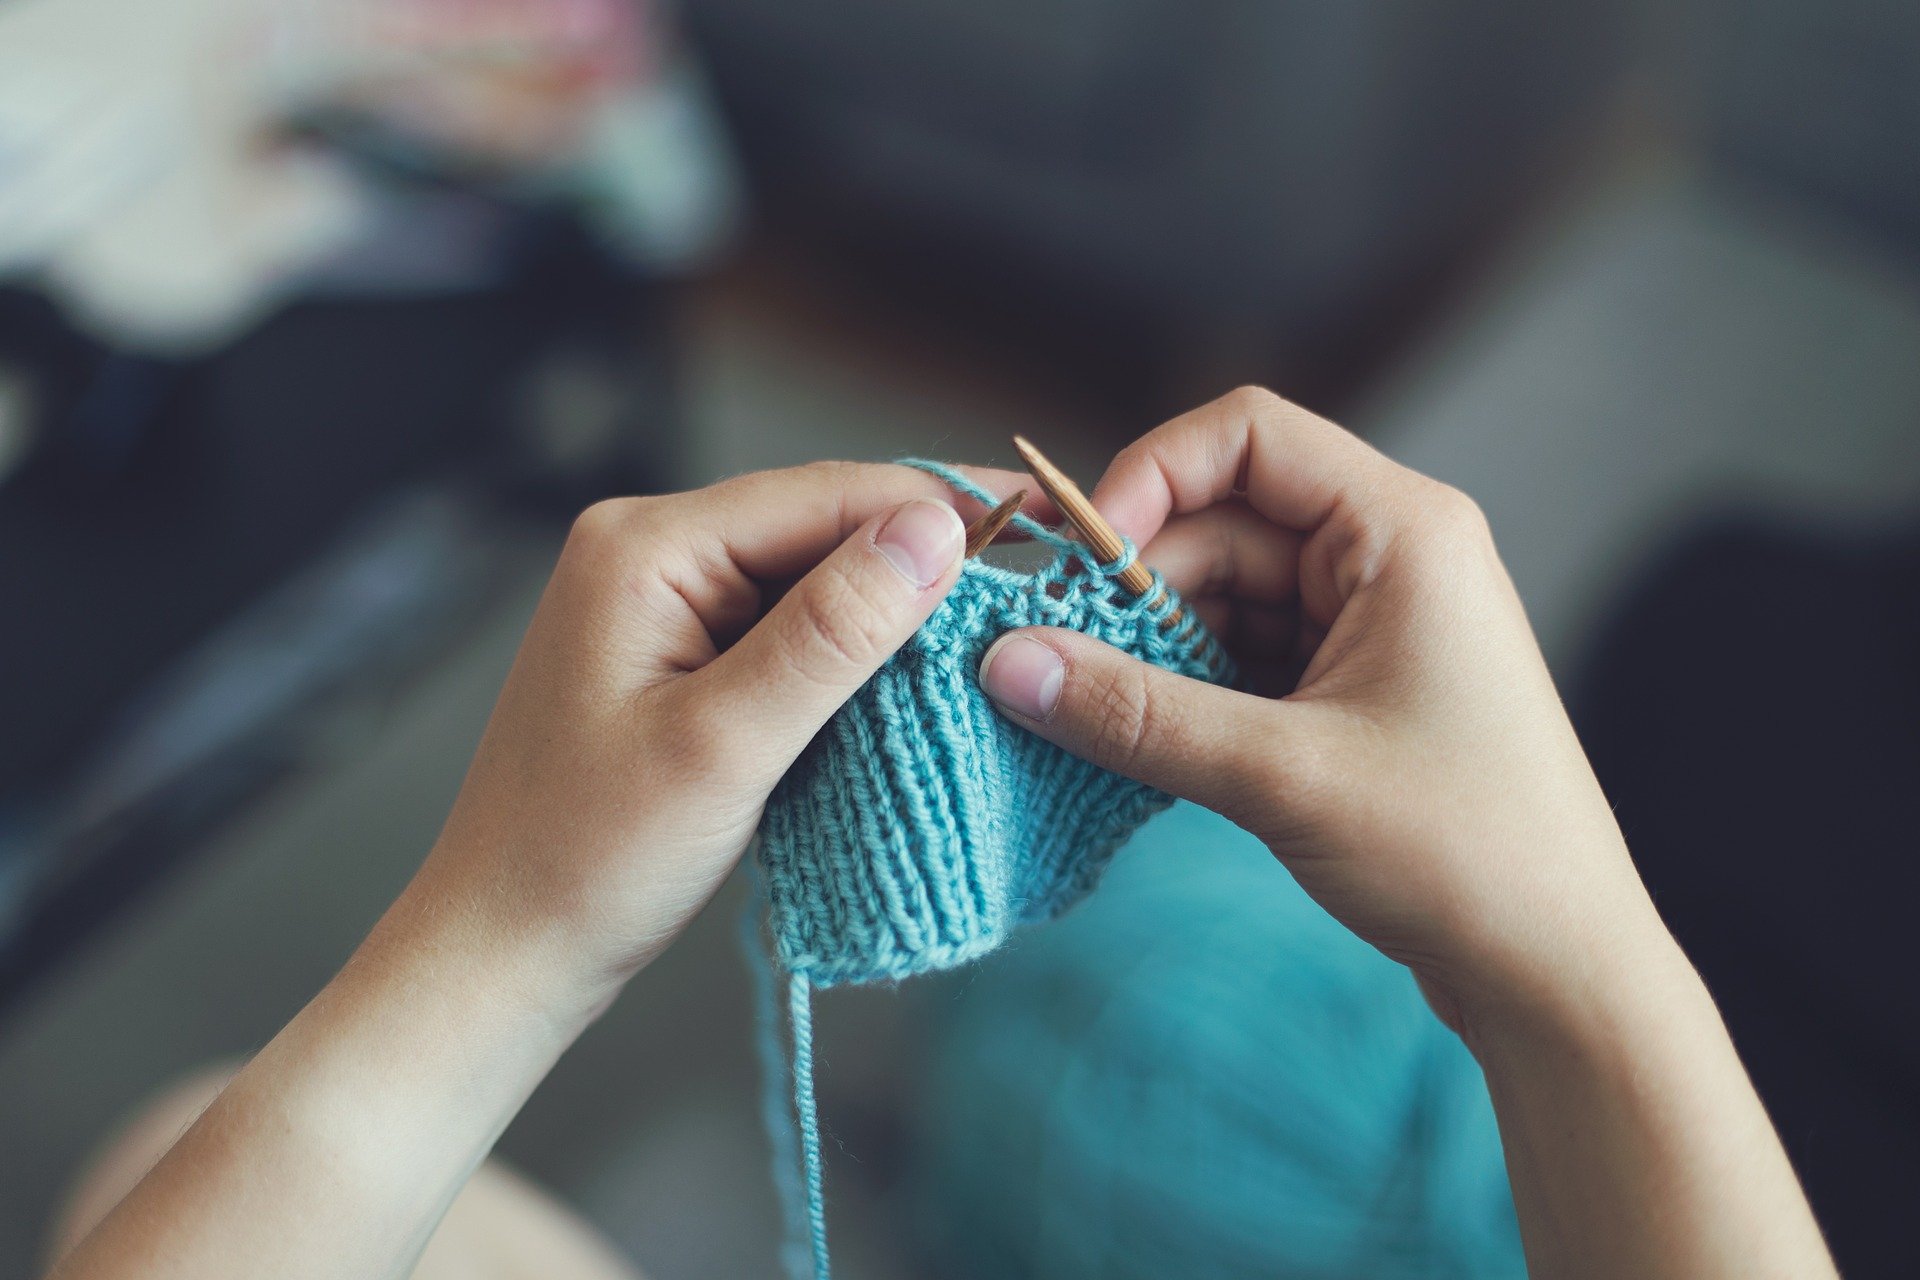 Everything you need to know about getting started with knitting and crochet